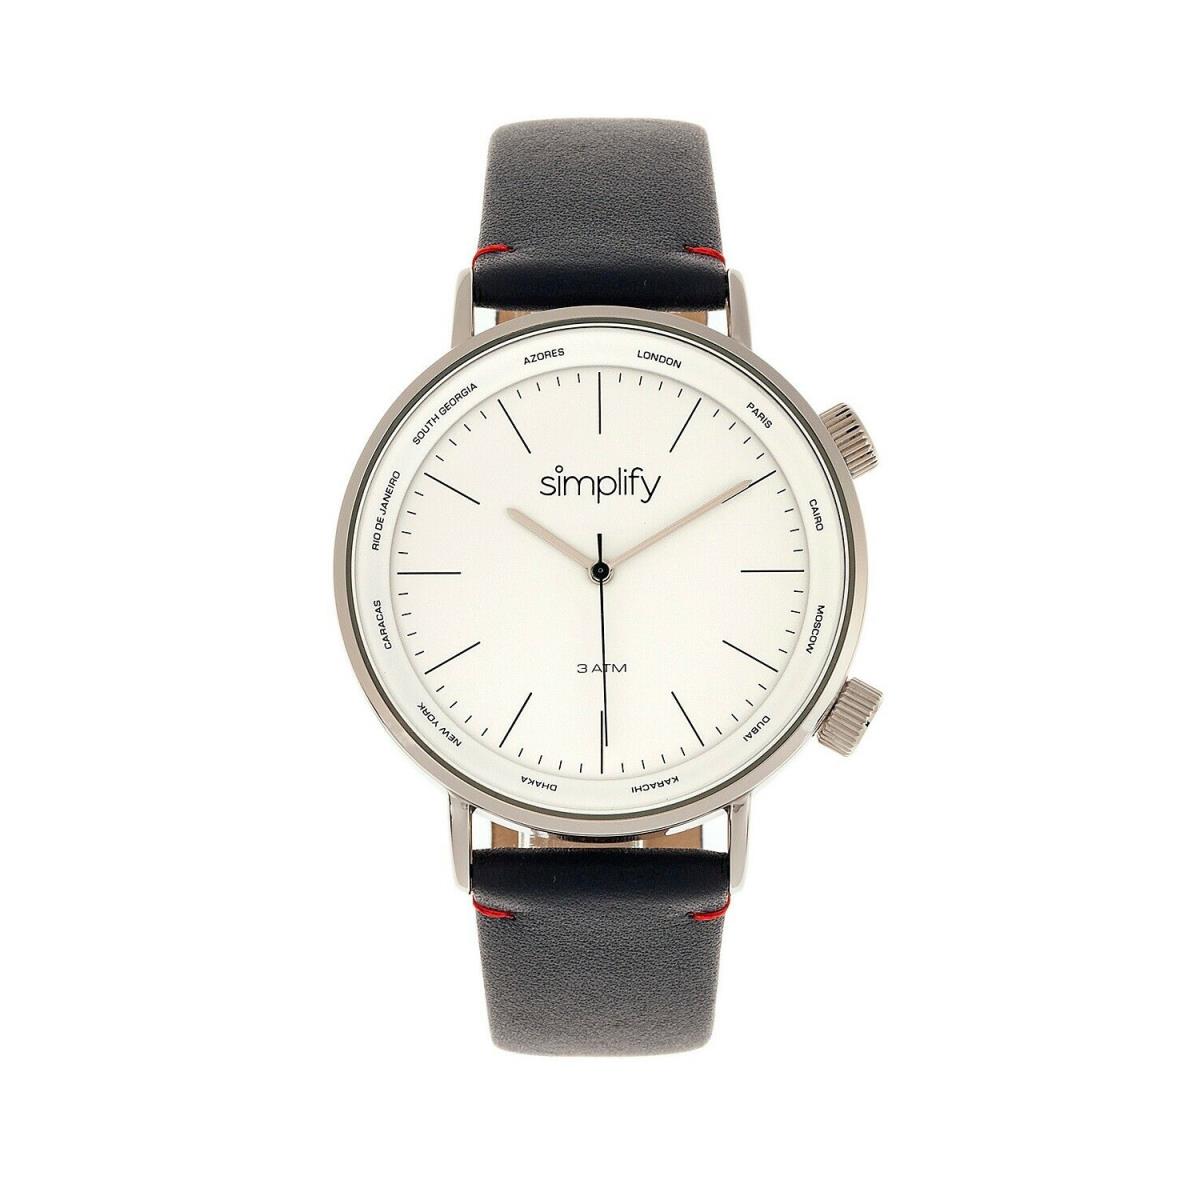 Simplify Quartz The 3300 White Dial Navy Leather Watch 43mm Qvc - Dial: White, Band: Blue